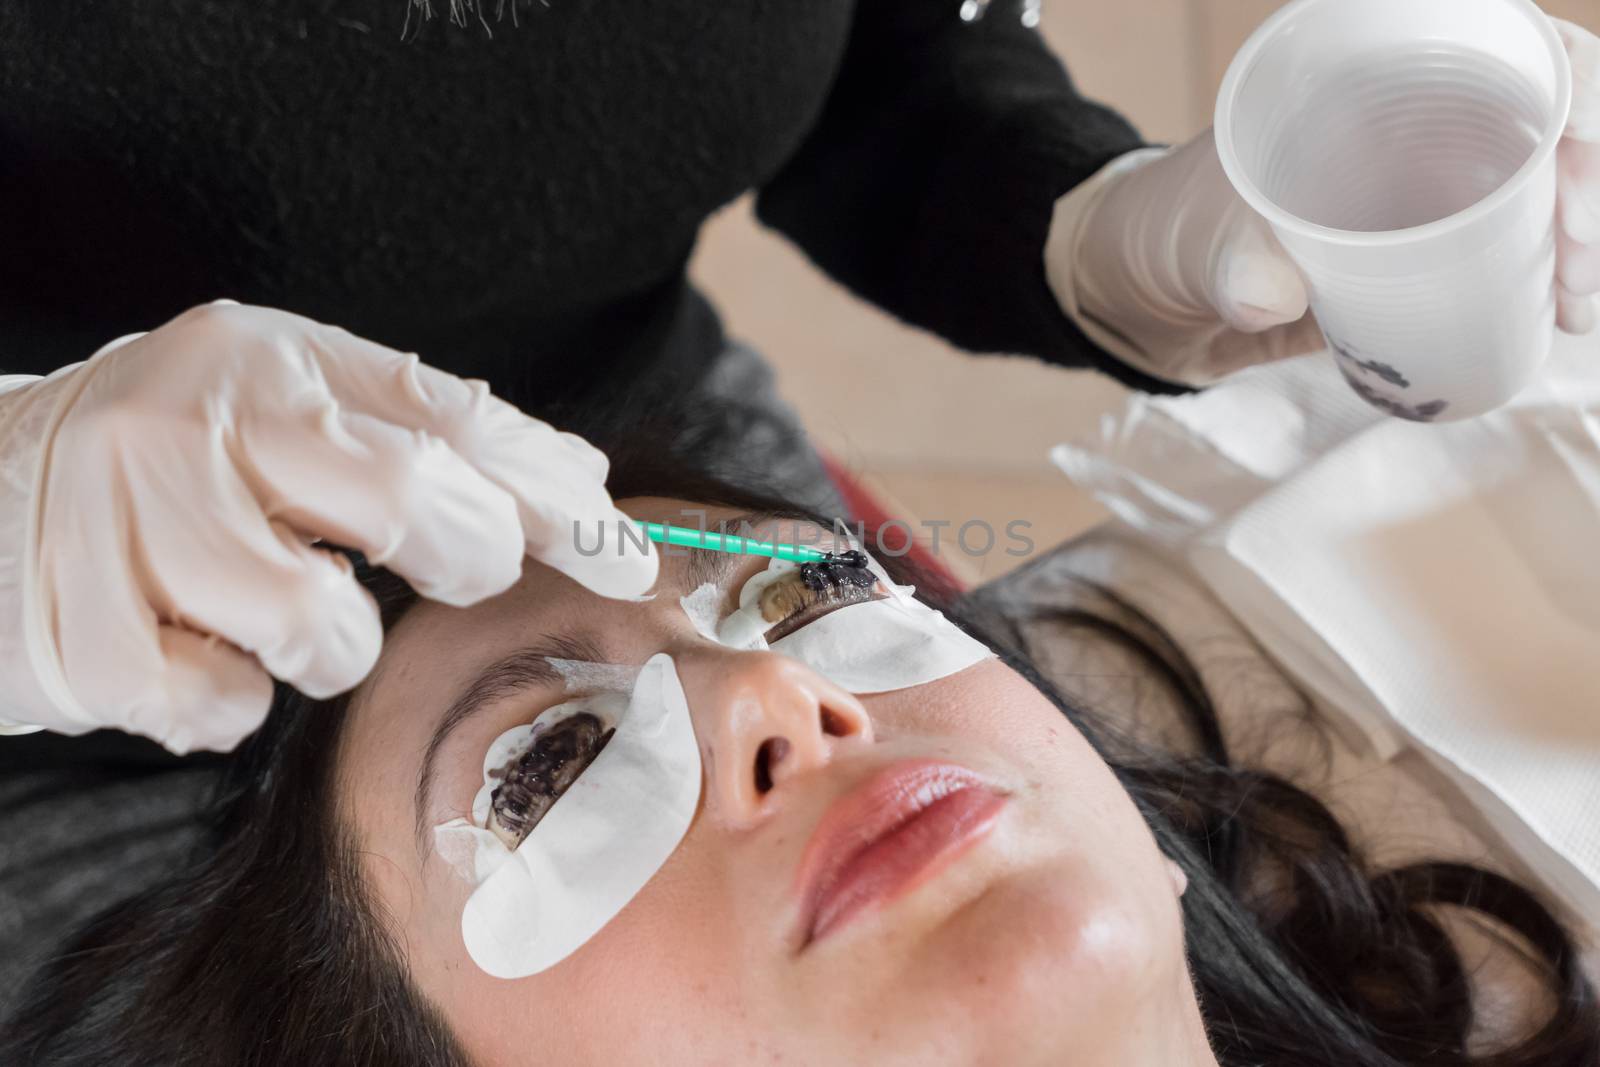 Cosmetic procedure of dyeing and lamination of eyelashes. Extension, perm, lamination of eyelashes. Eyelash care.